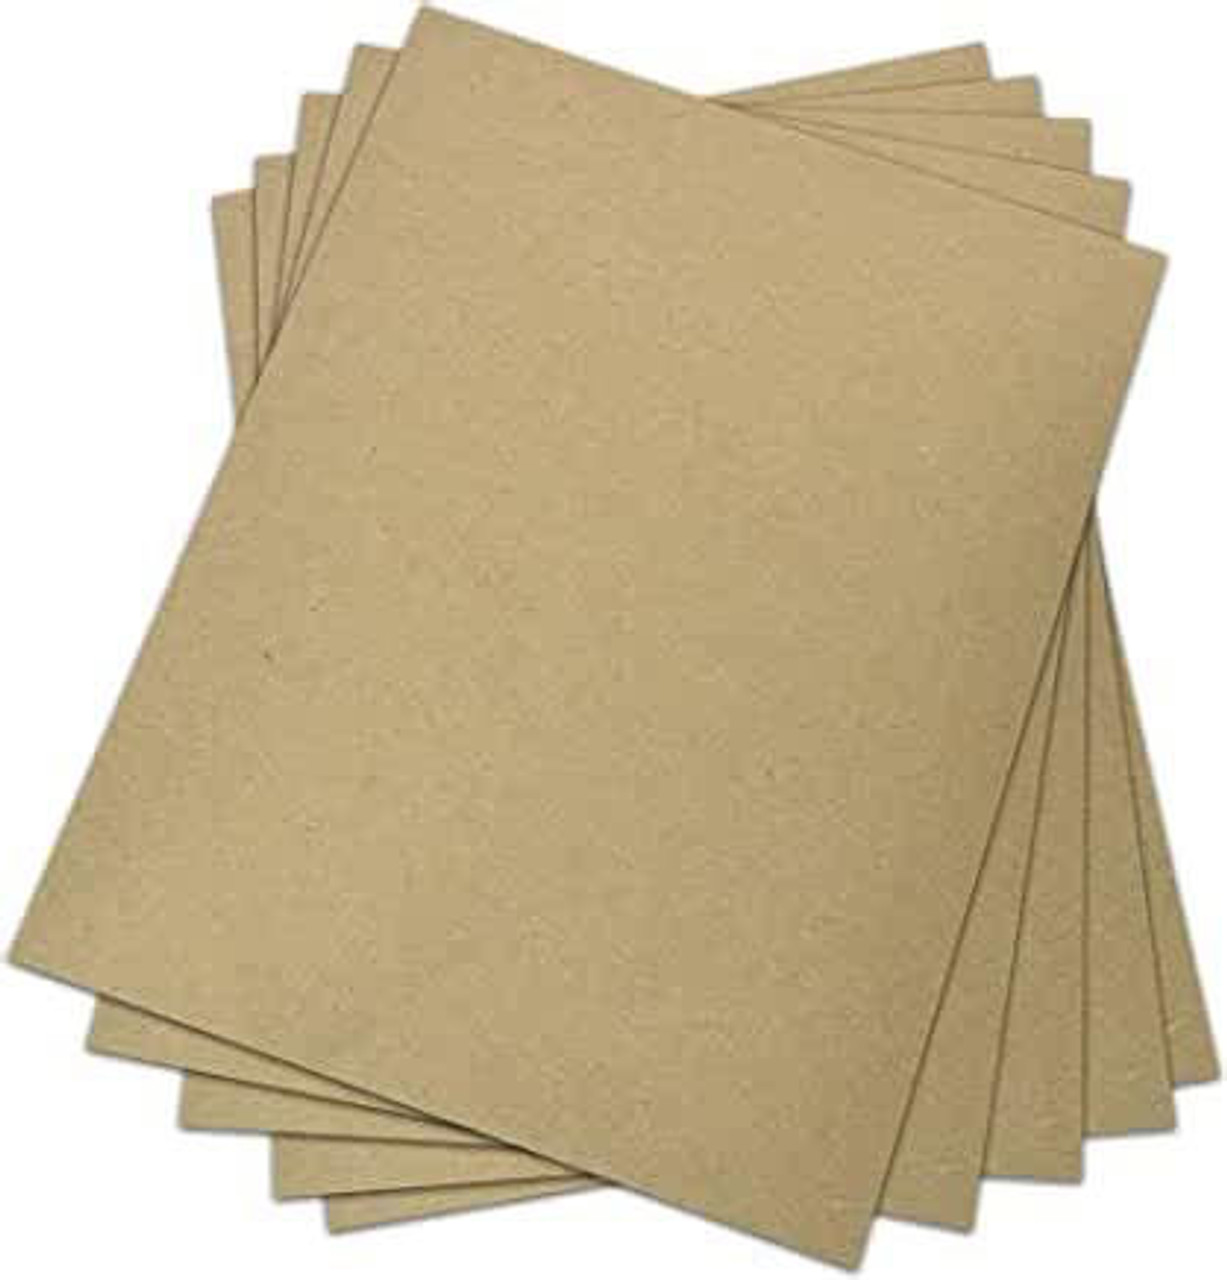 Knitial 22 pt White Chipboard 8 x 10 inch 20 Sheets for Crafts, Backing  Boards, Scrapbooking, Frames and More